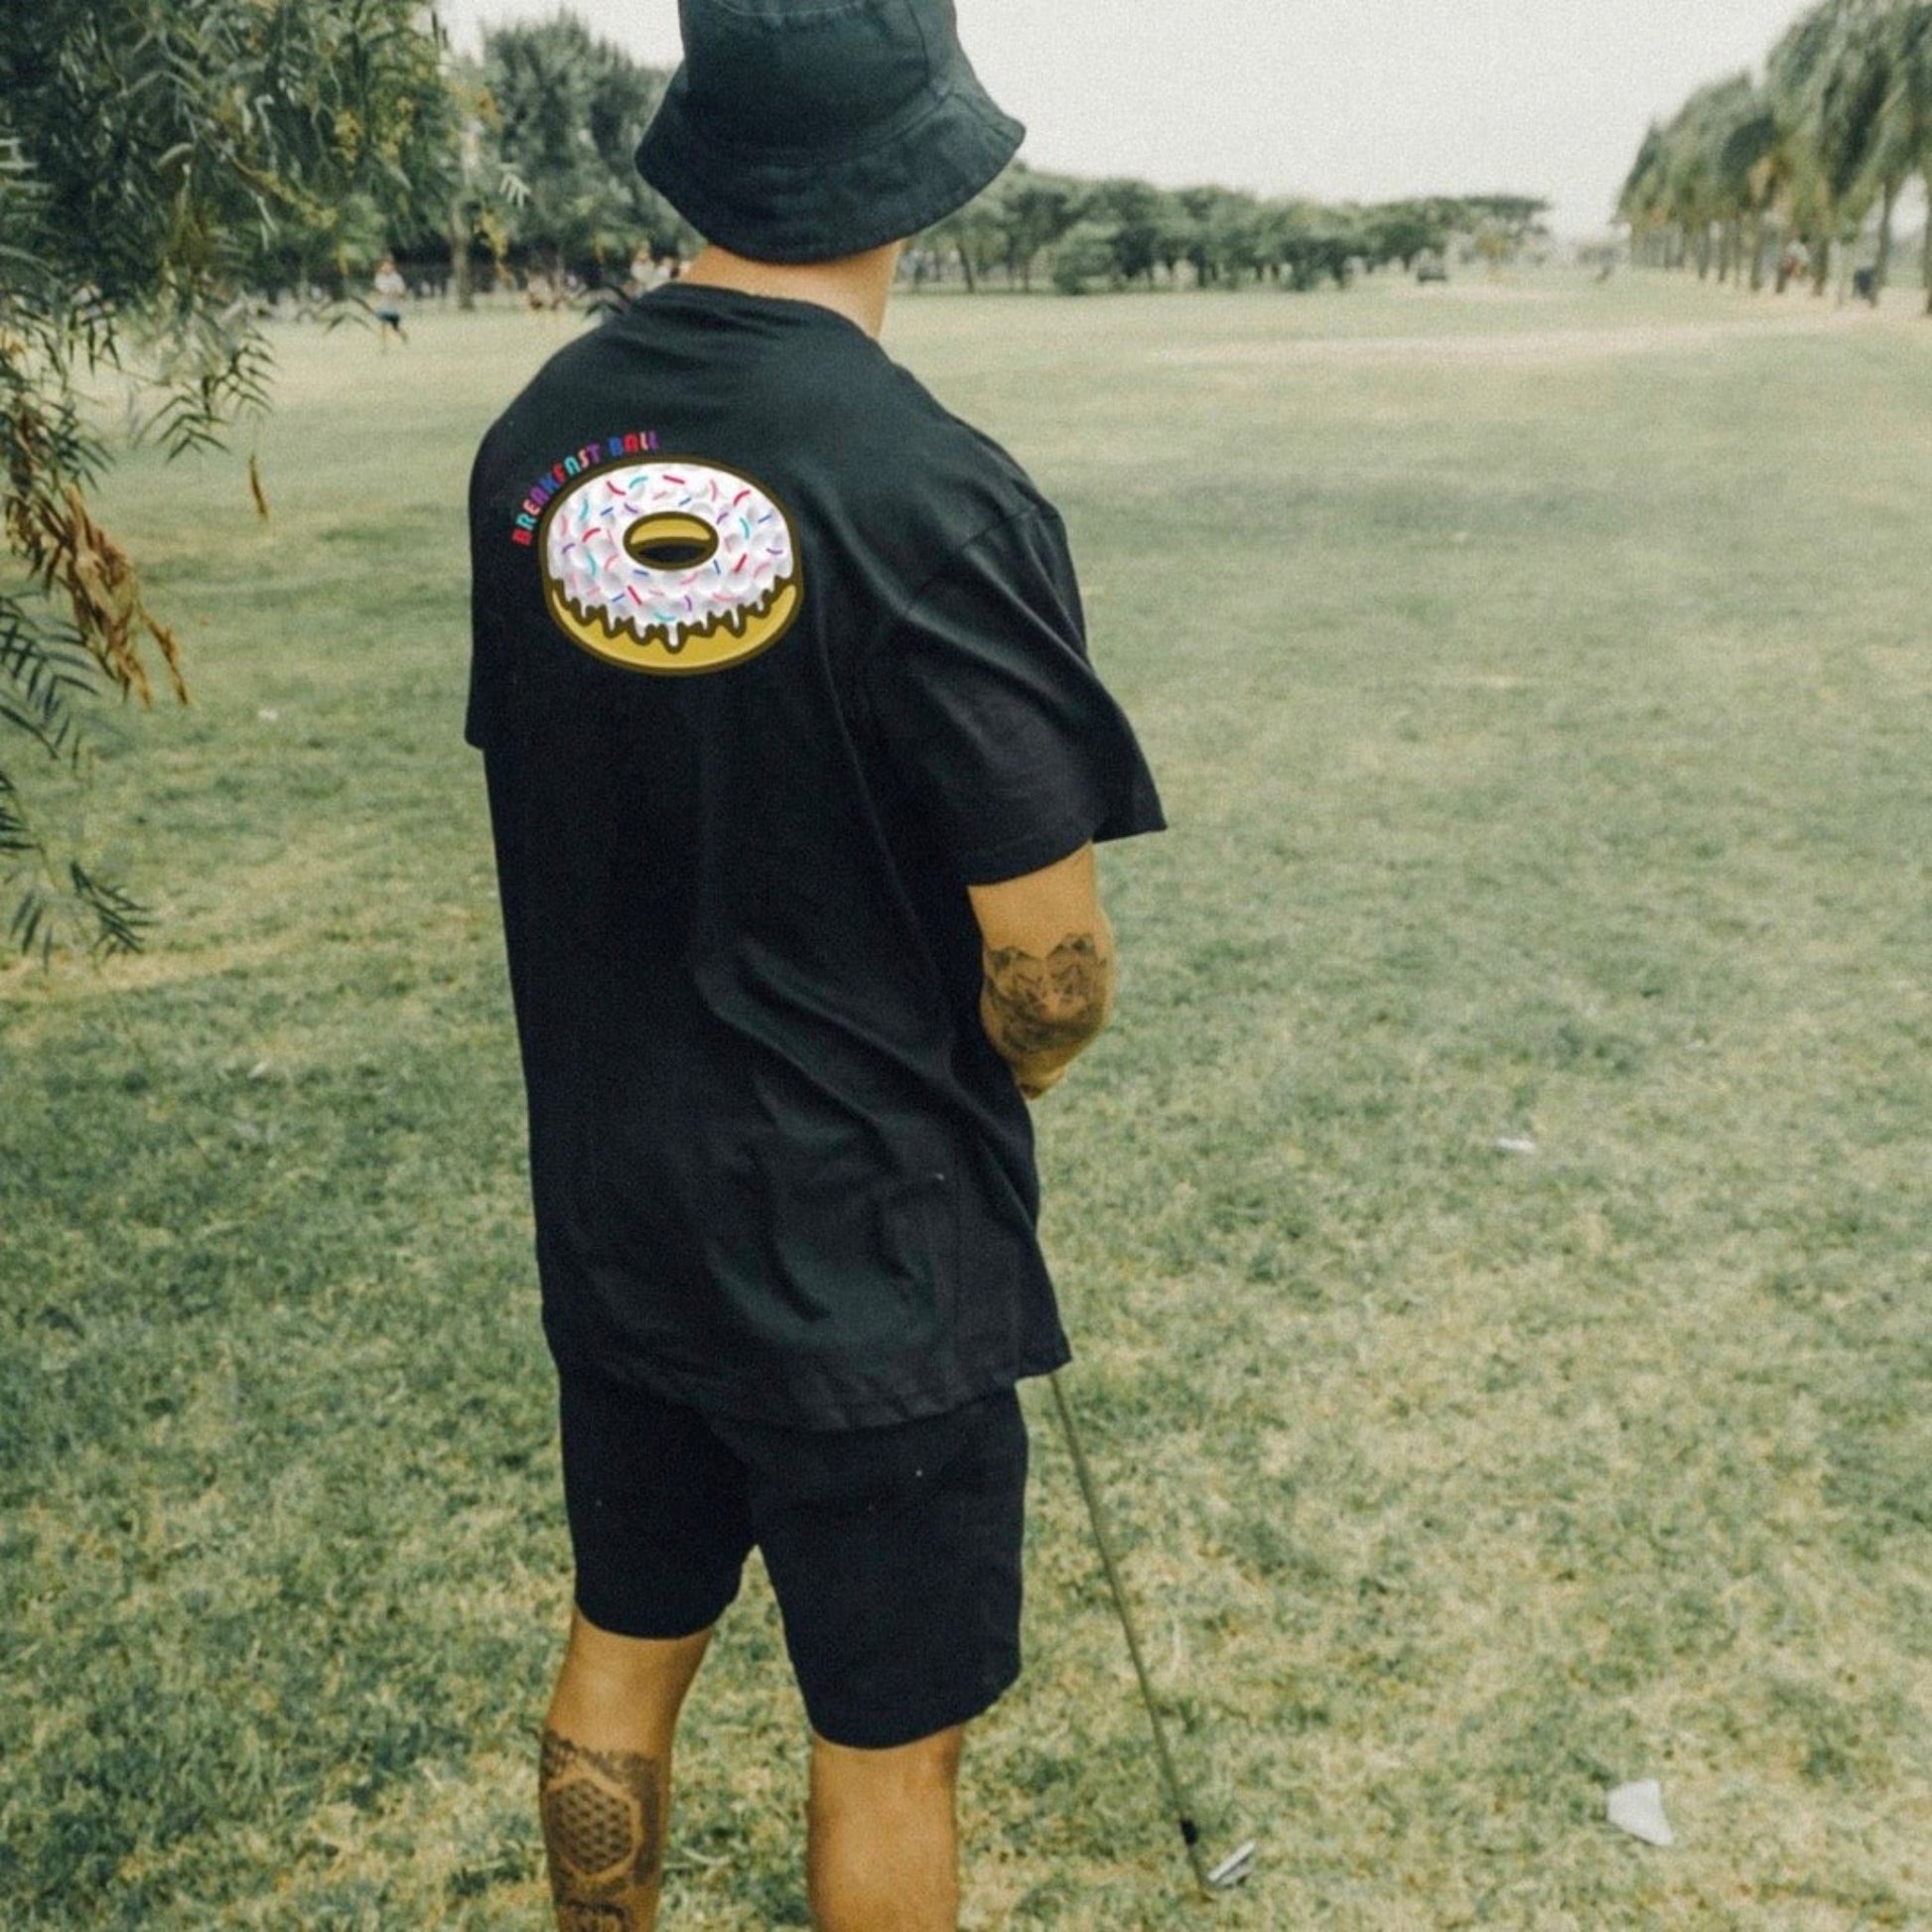 man on golf course holding a golf club wearing the black breakfastball shirt.  